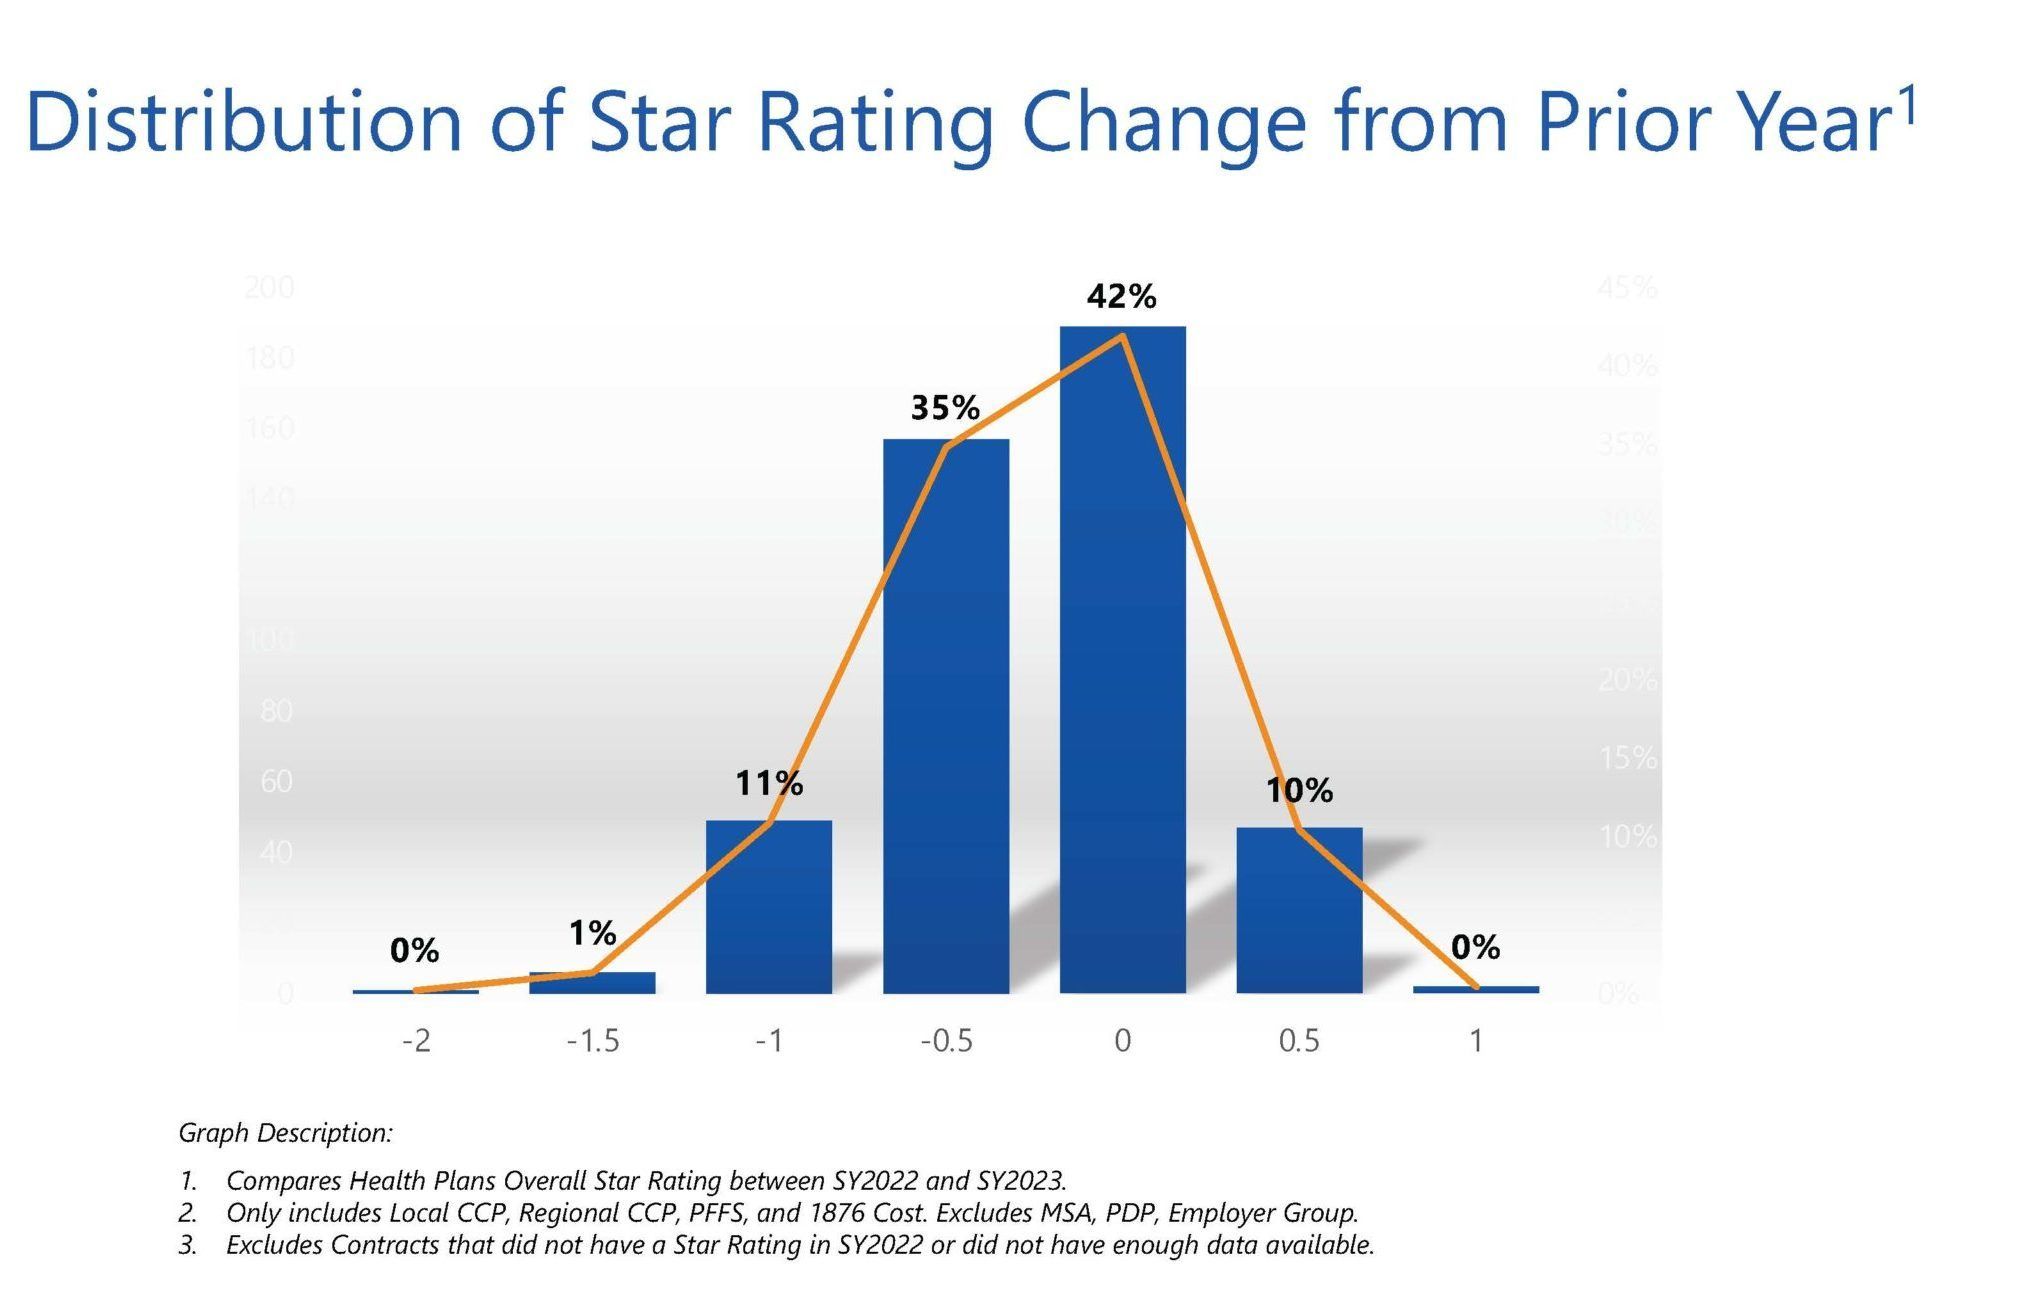 Graph compares health plans overall star rating between SY2022 and SY2023